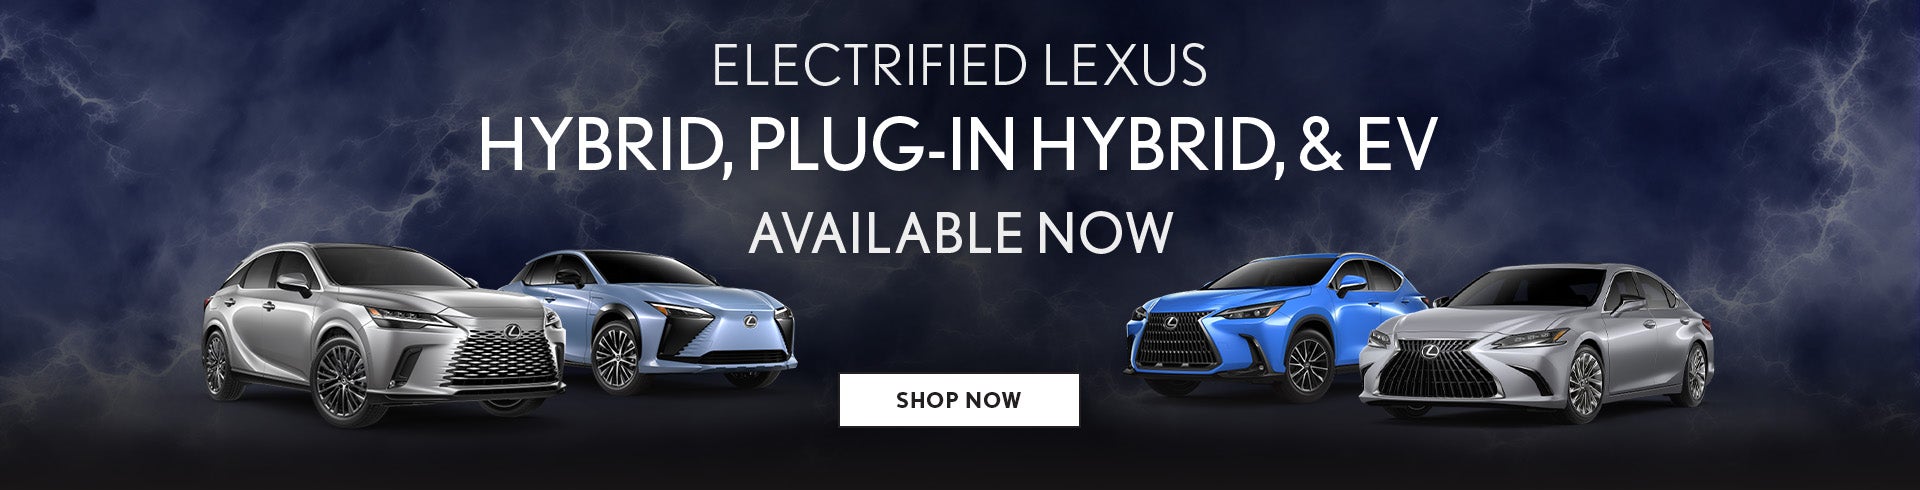 Get Your Electrified Lexus Today!